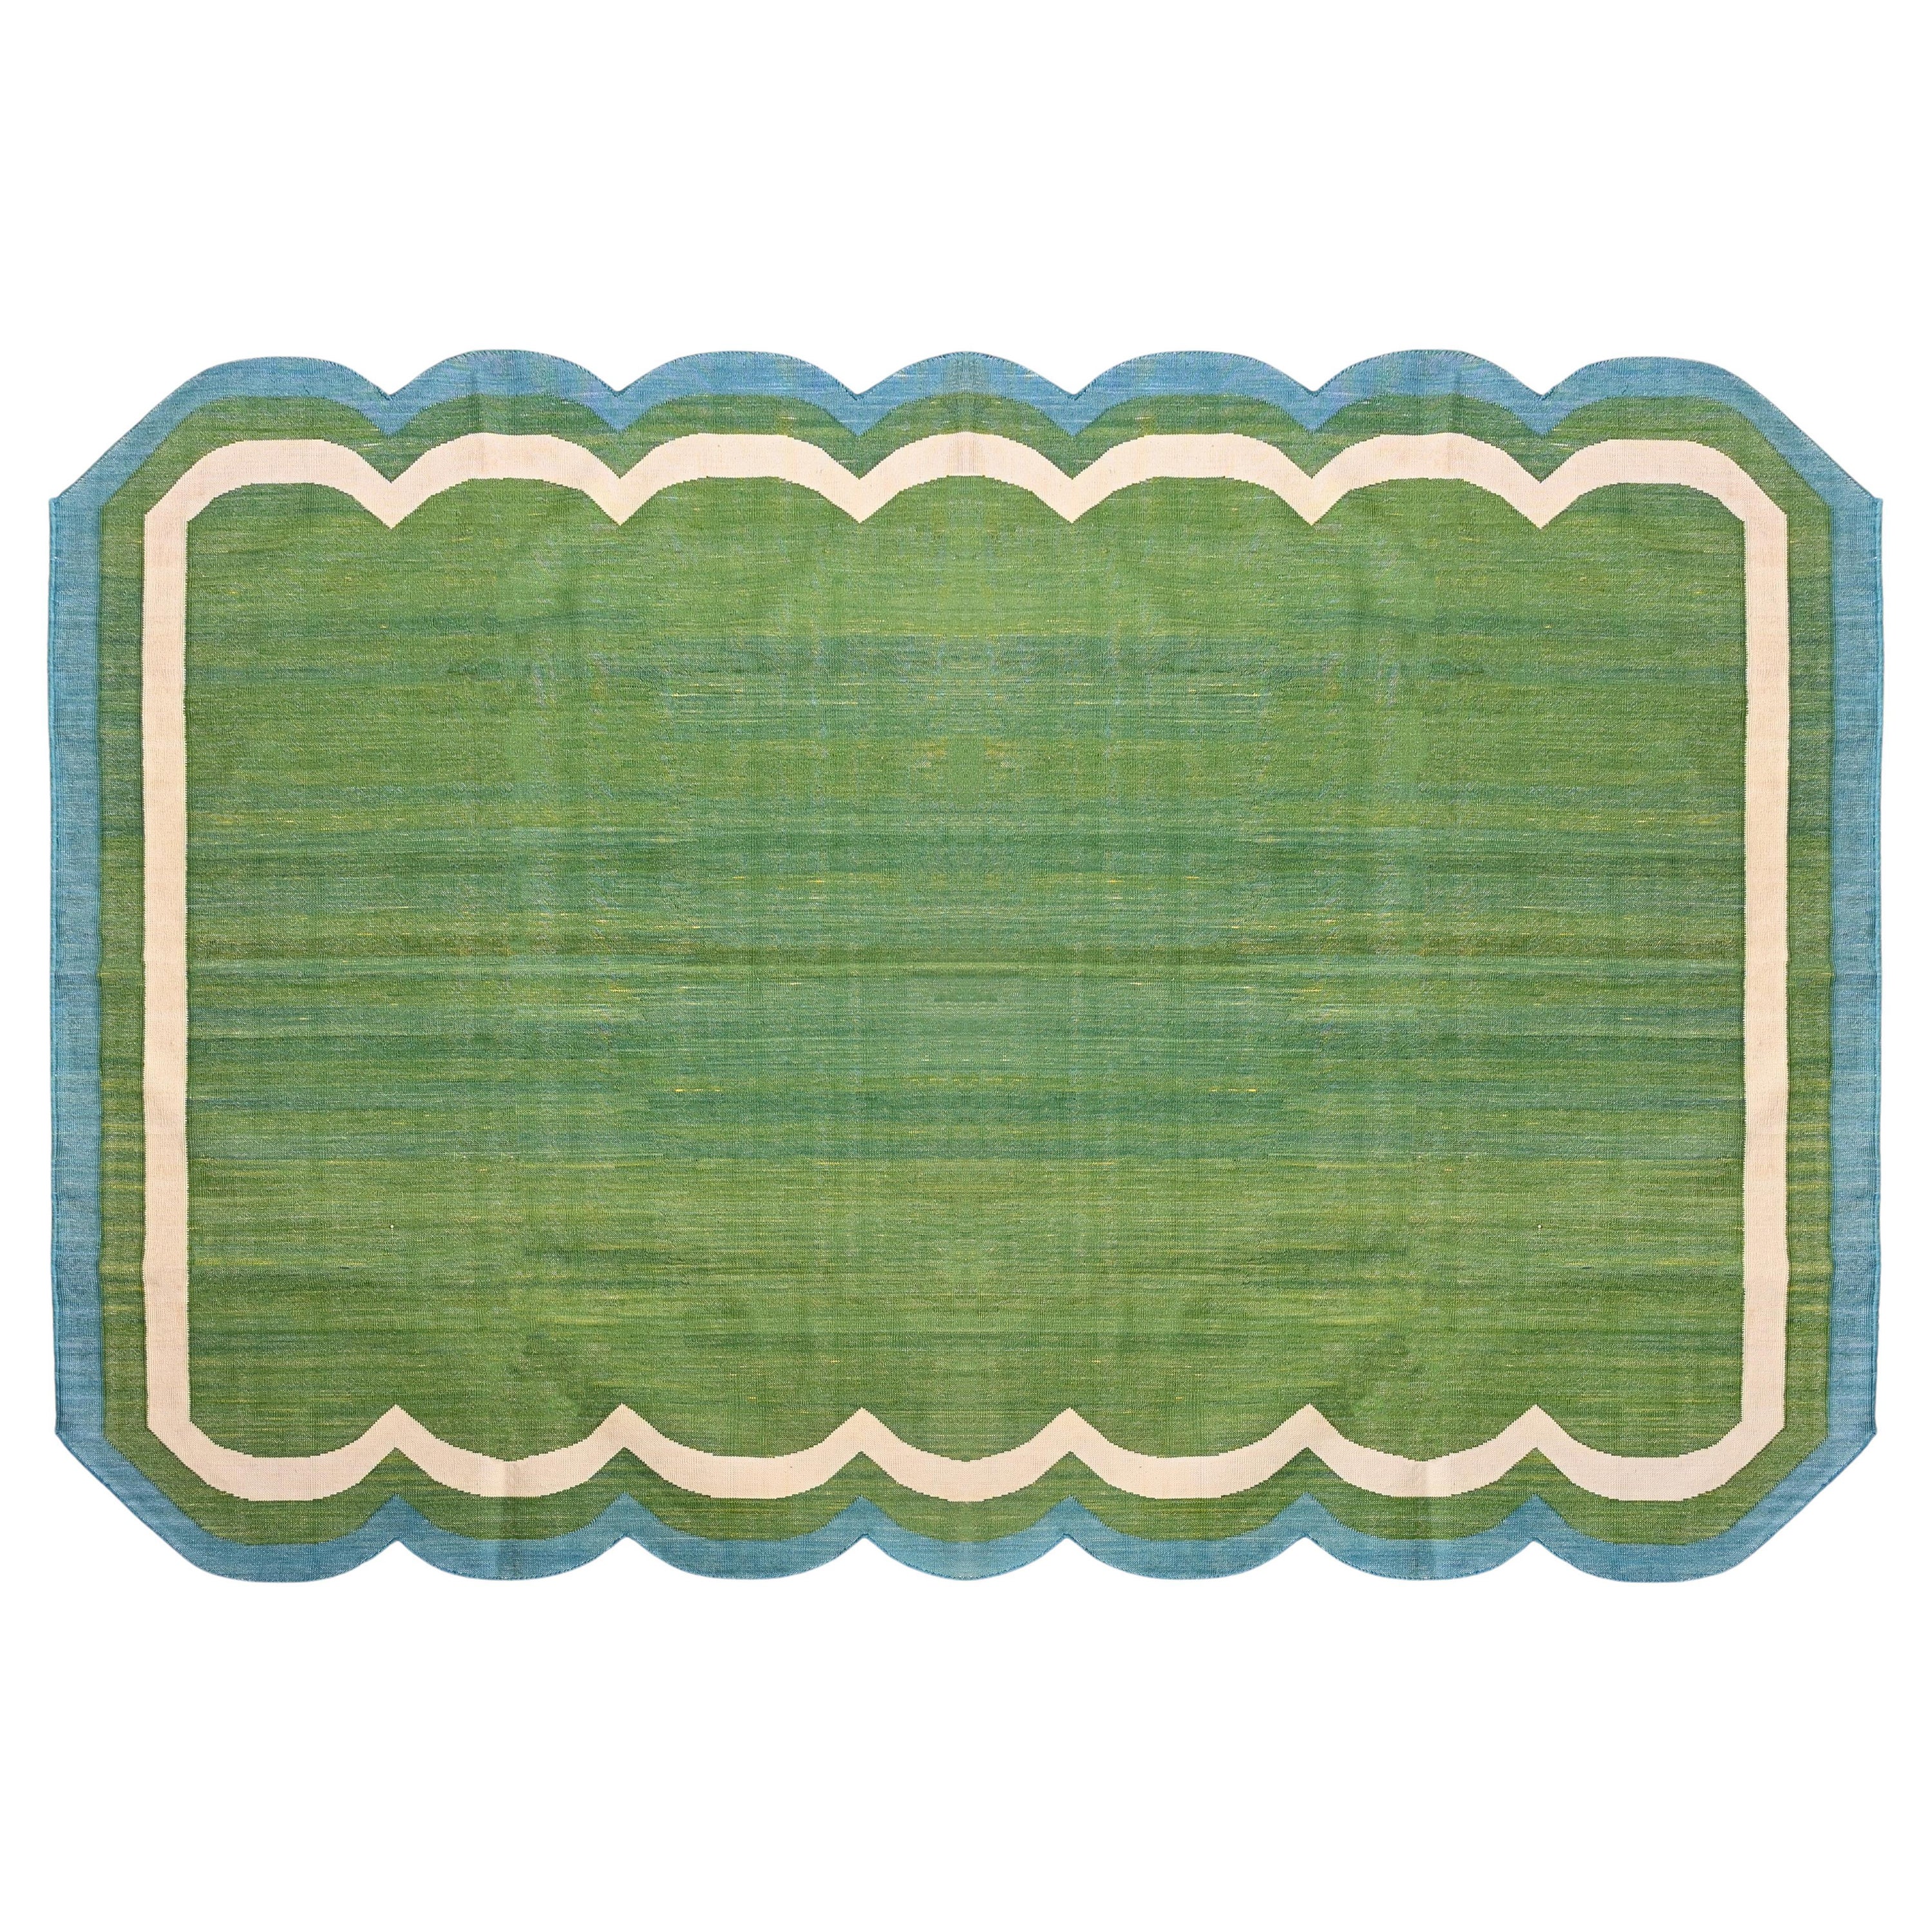 Handmade Cotton Area Flat Weave Rug, 5x8 Green And Blue Scalloped Kilim Dhurrie For Sale